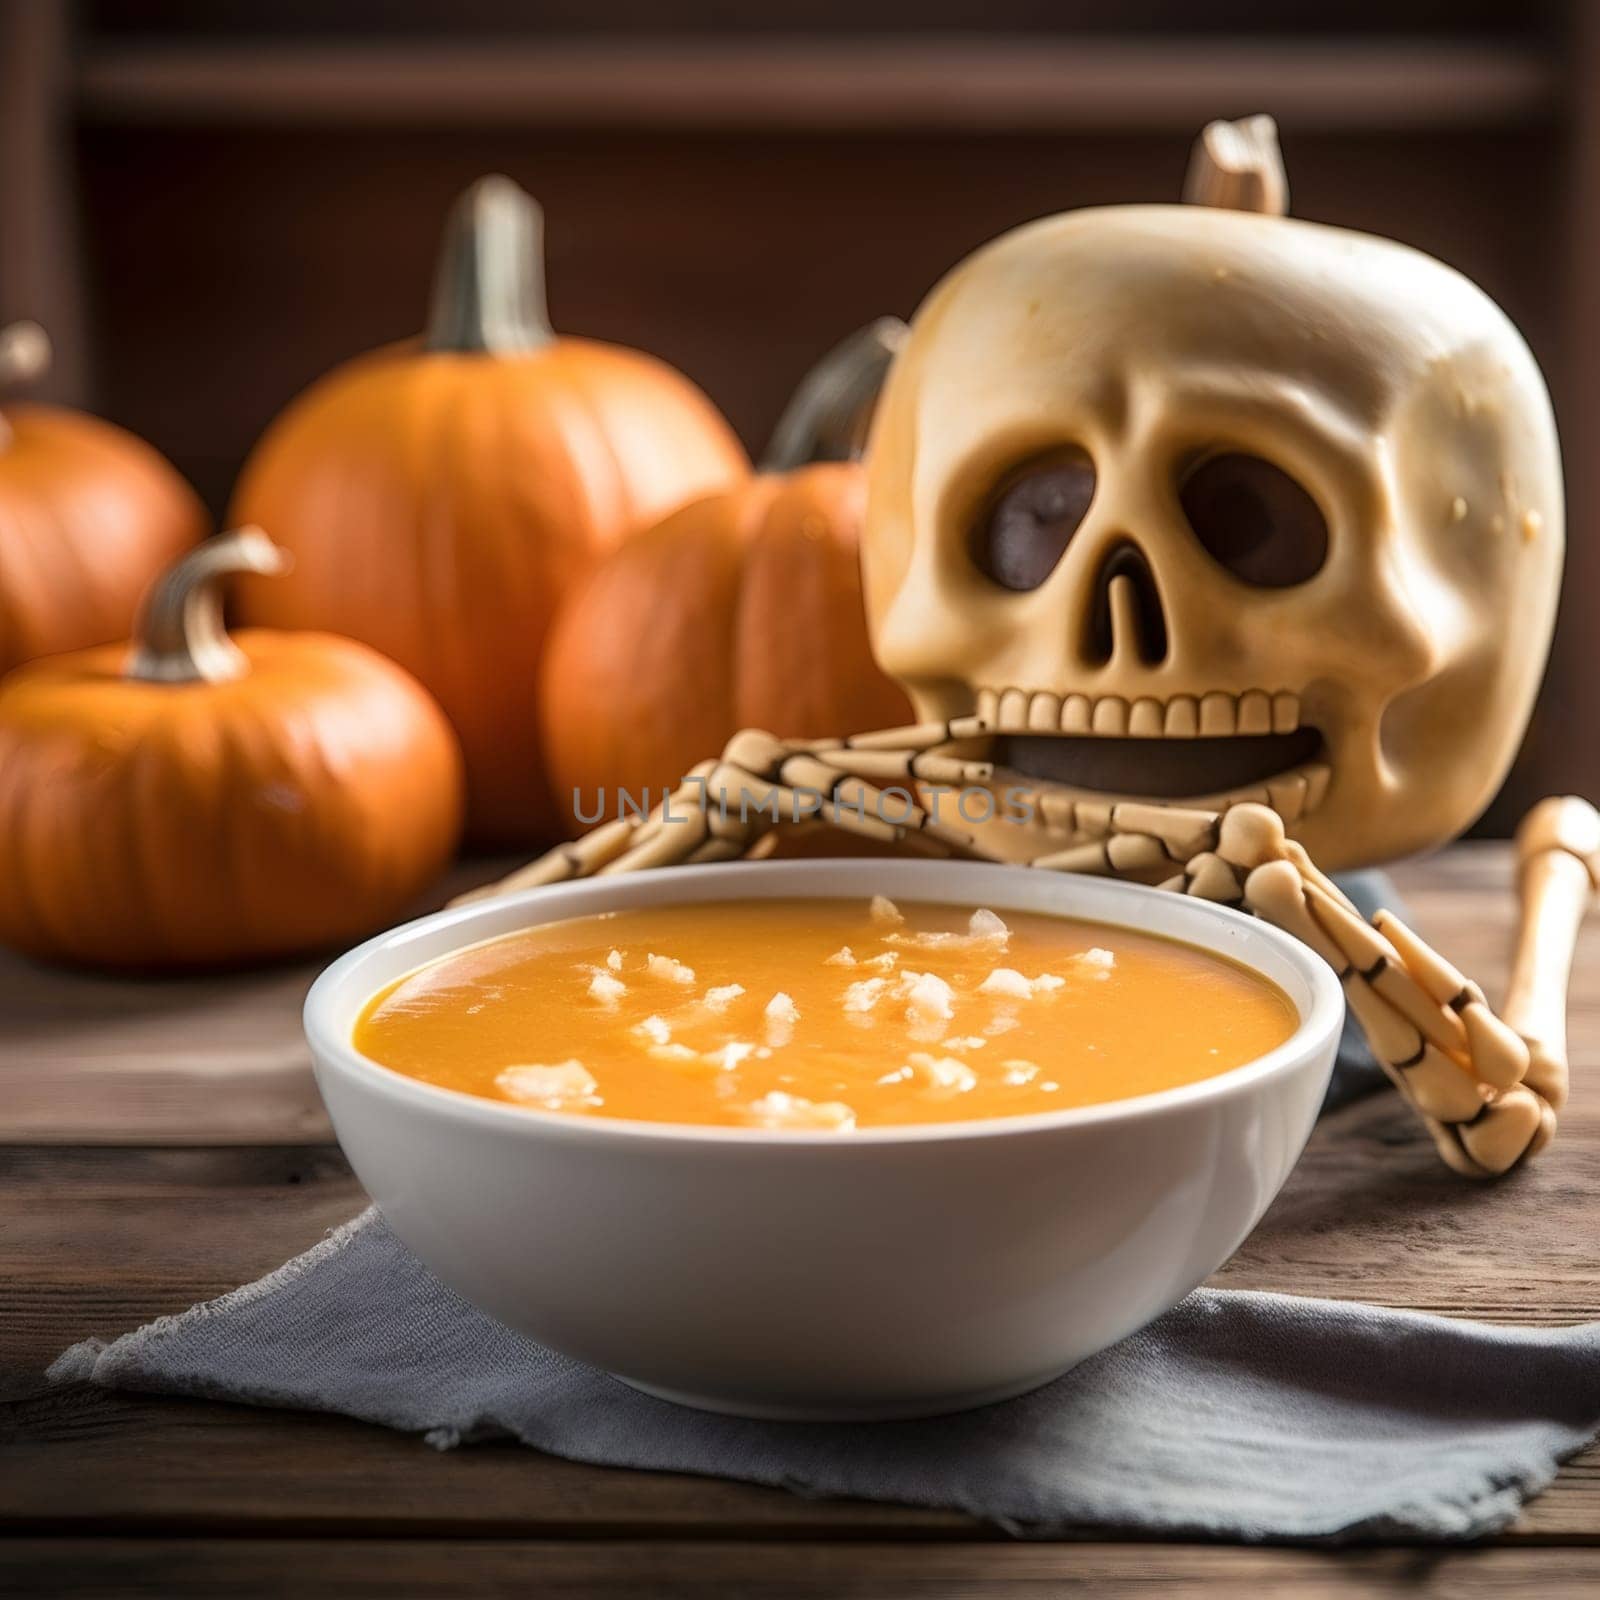 One bowl of pumpkin soup with cream cheese, skeleton and pumpkins lies on a wooden table in the kitchen with a blurred background, close-up side view.